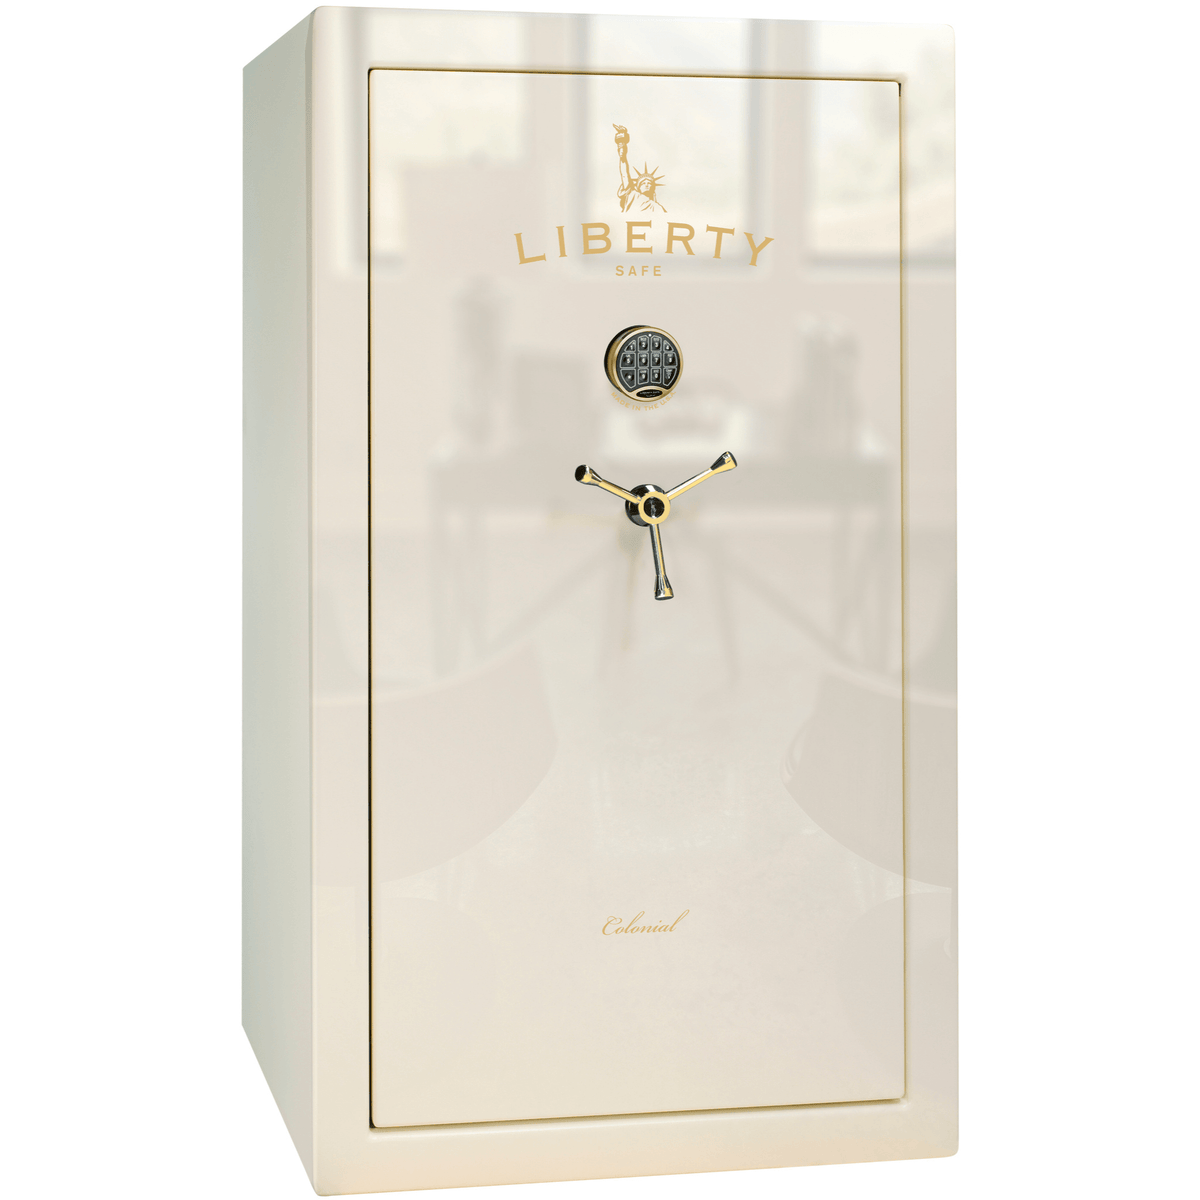 Liberty Colonial 30 Safe in White Gloss with Brass Electronic Lock.